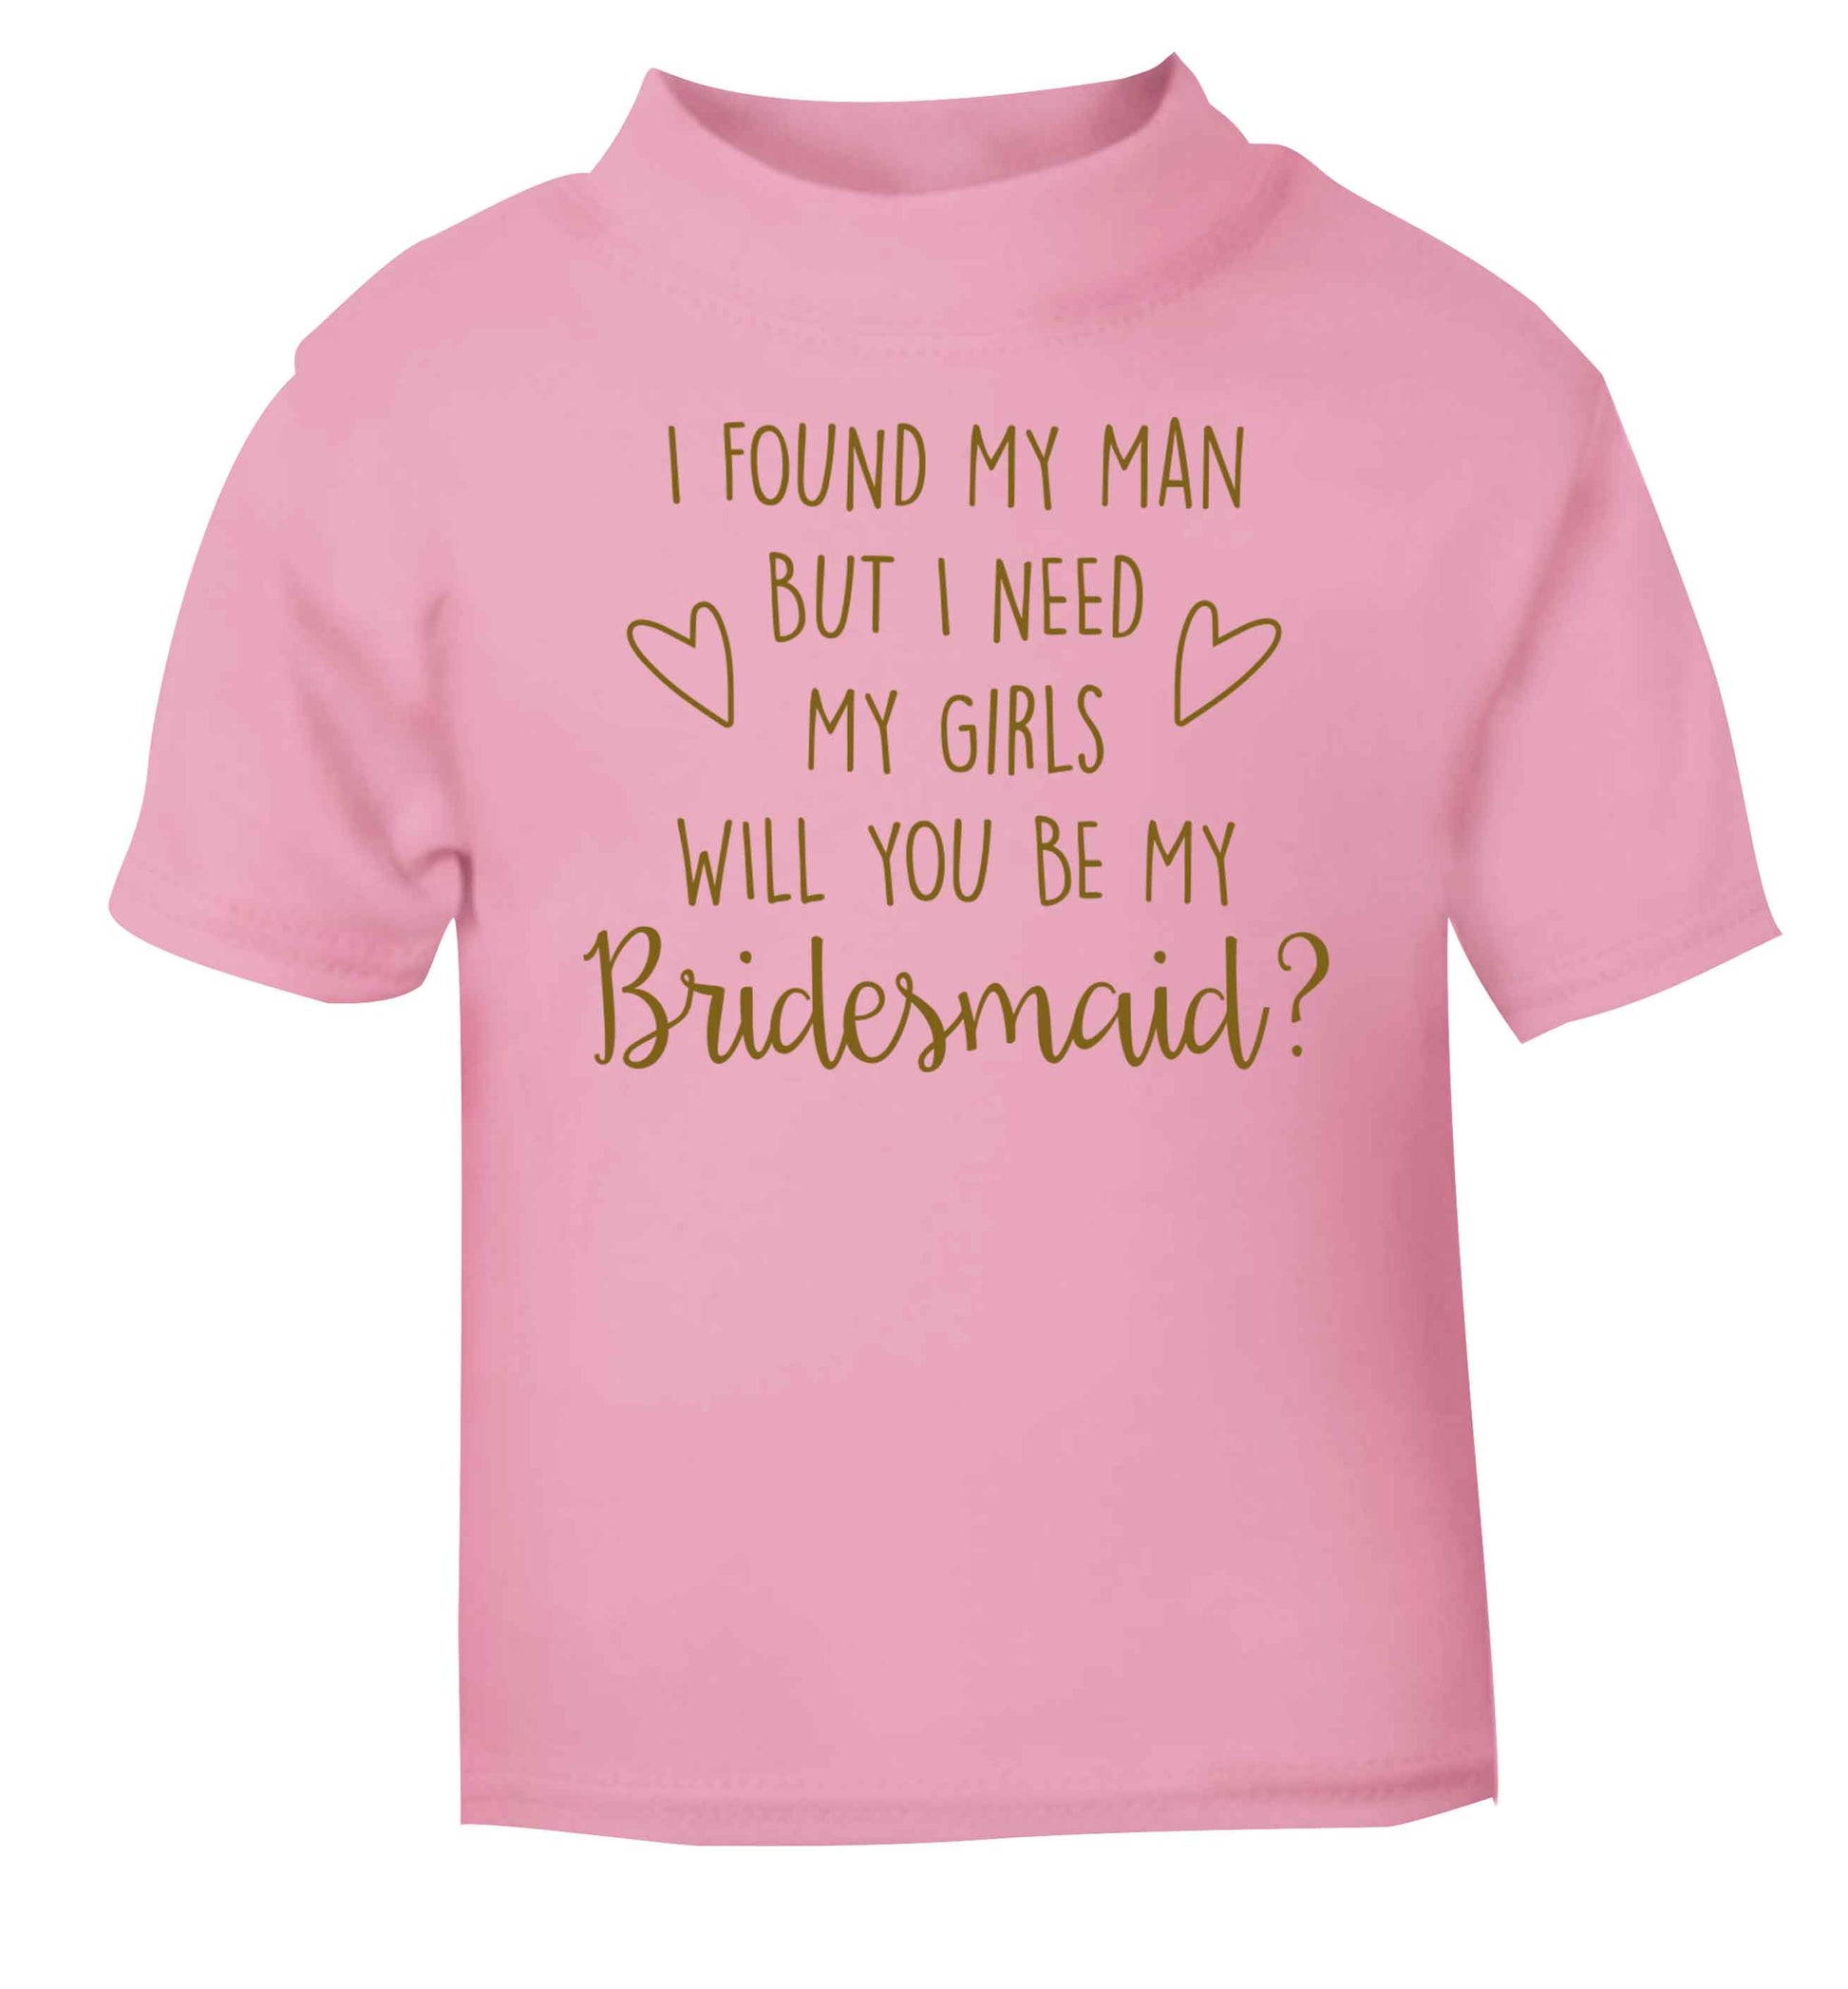 I found my man but I need my girls will you be my bridesmaid? light pink baby toddler Tshirt 2 Years